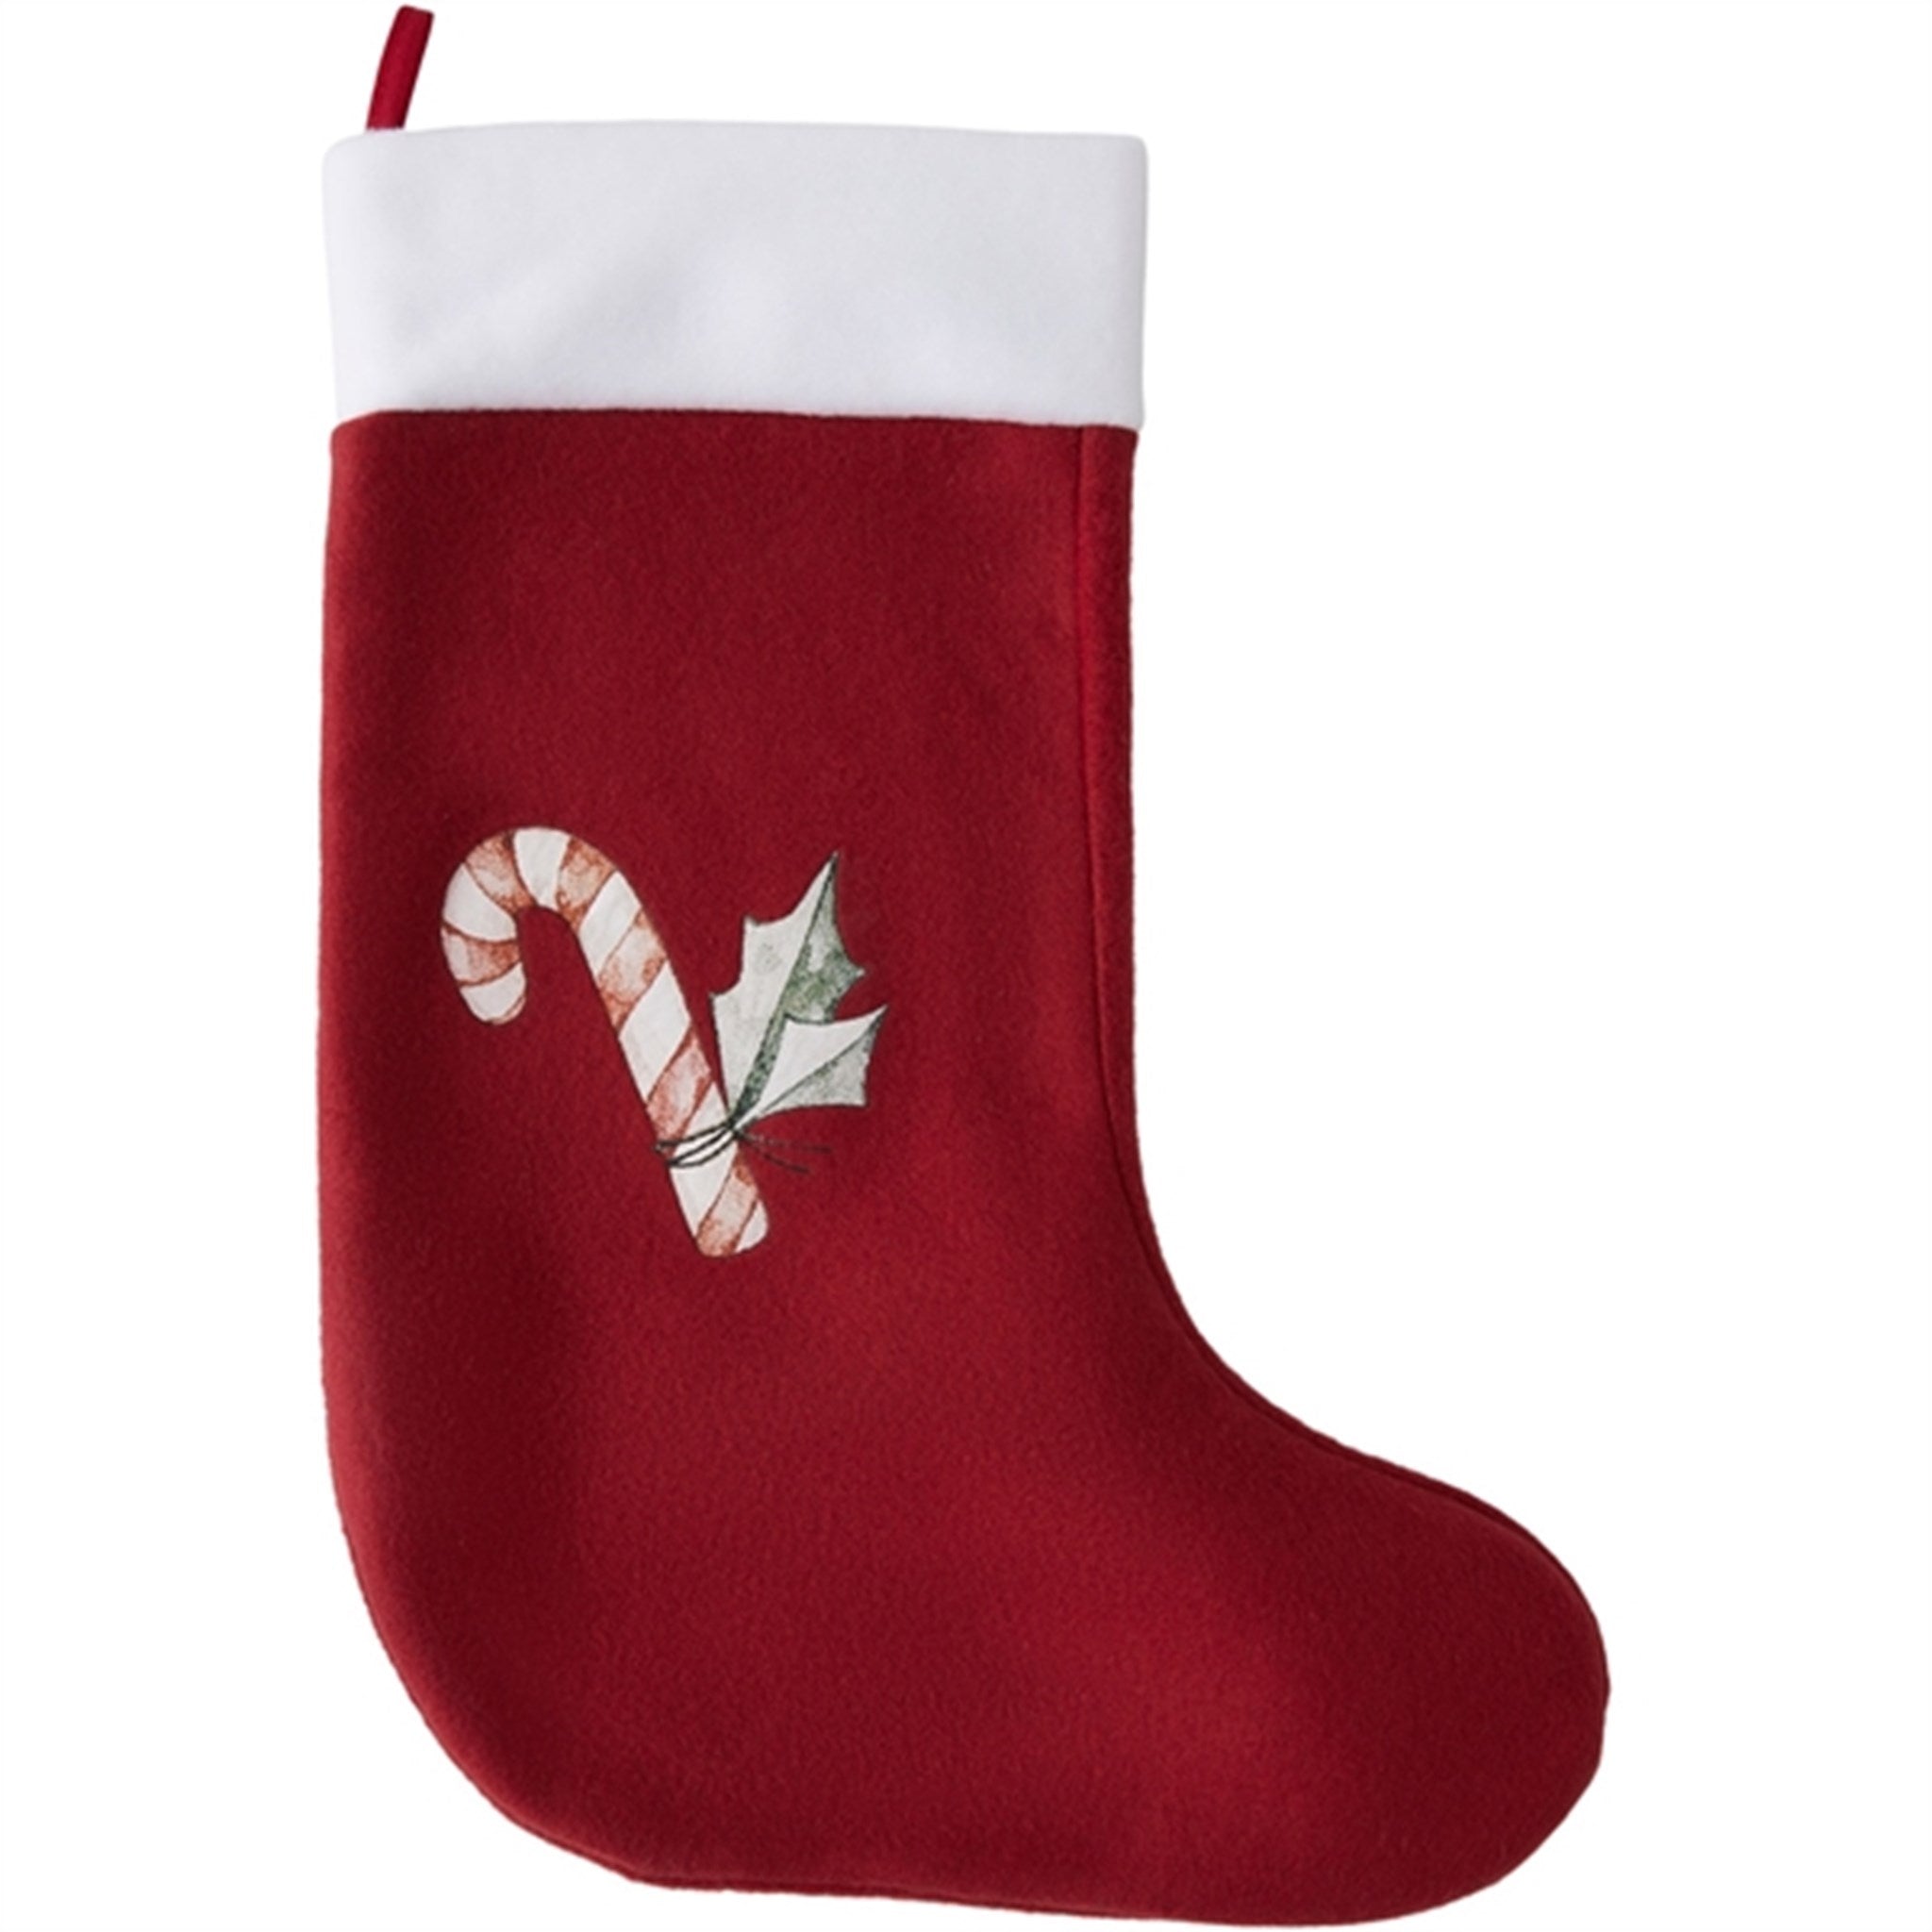 Name it Jester Red Rana Candy Cane Christmas Stocking